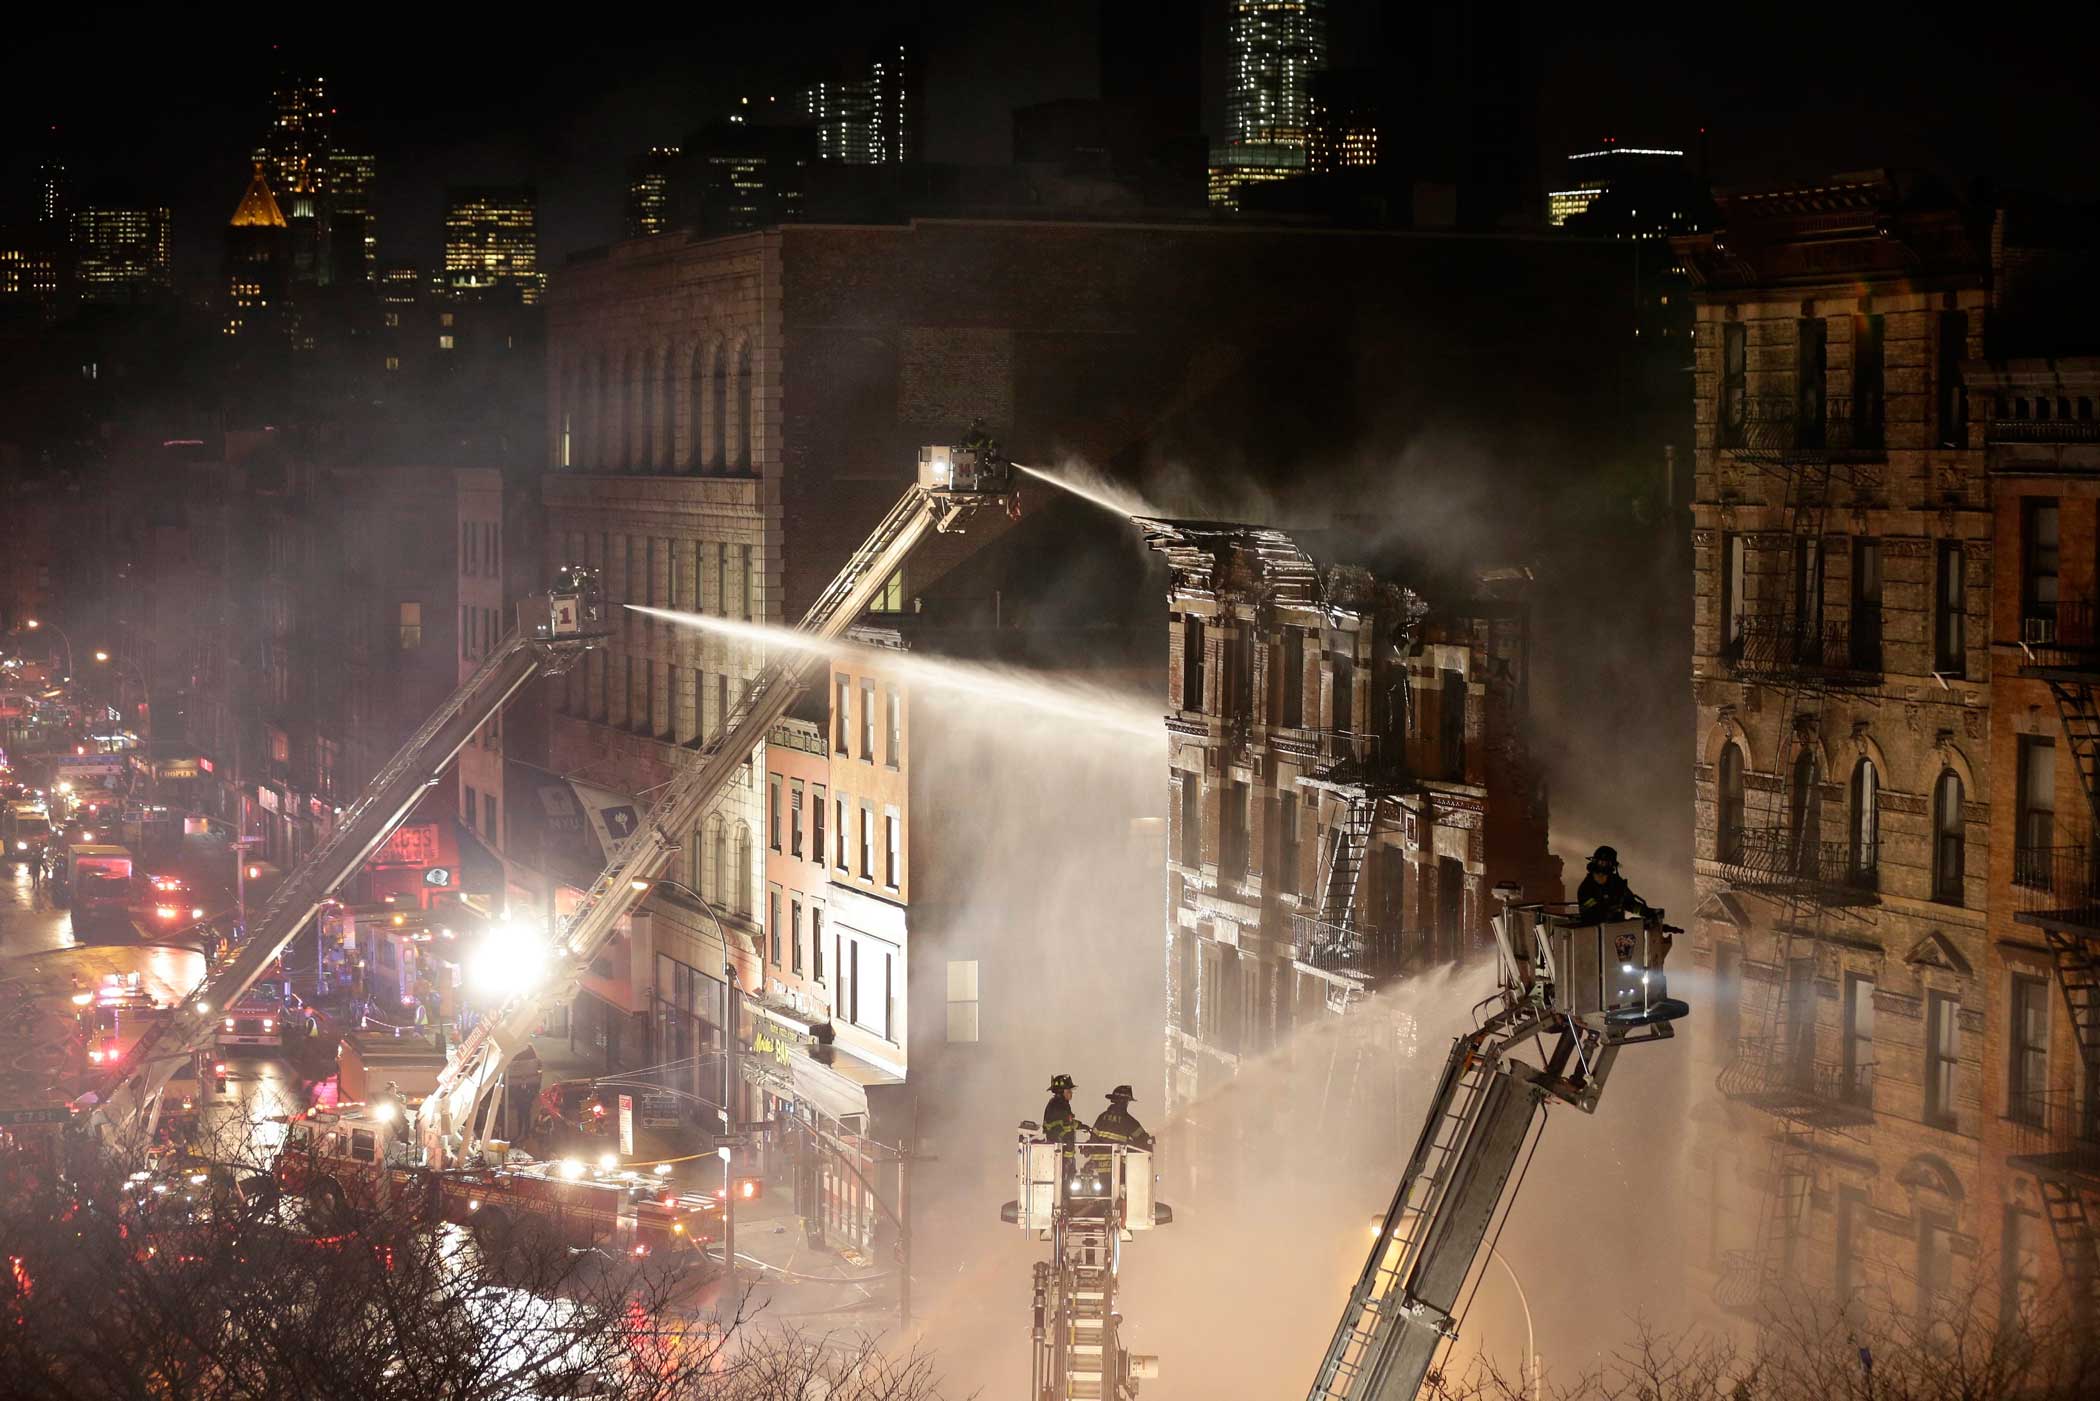 Firefighters respond to an explosion and partial building collapse in a residential and commercial mixed use multi-story structure in lower Manhattan, New York on March 26, 2015.